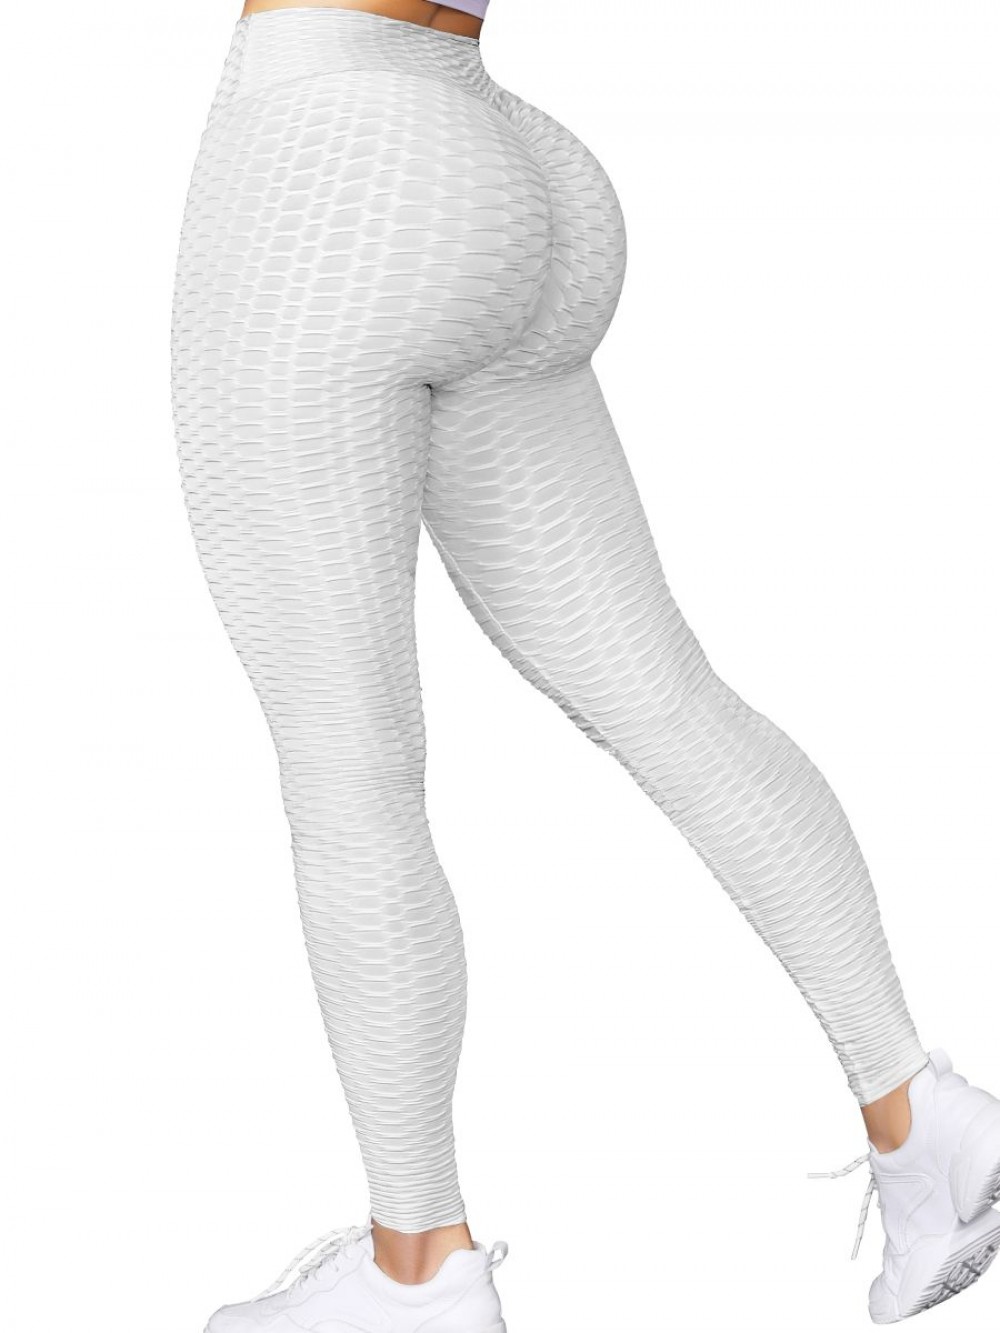 White High Waist Gym Tights Ruched Panel For Female Runner